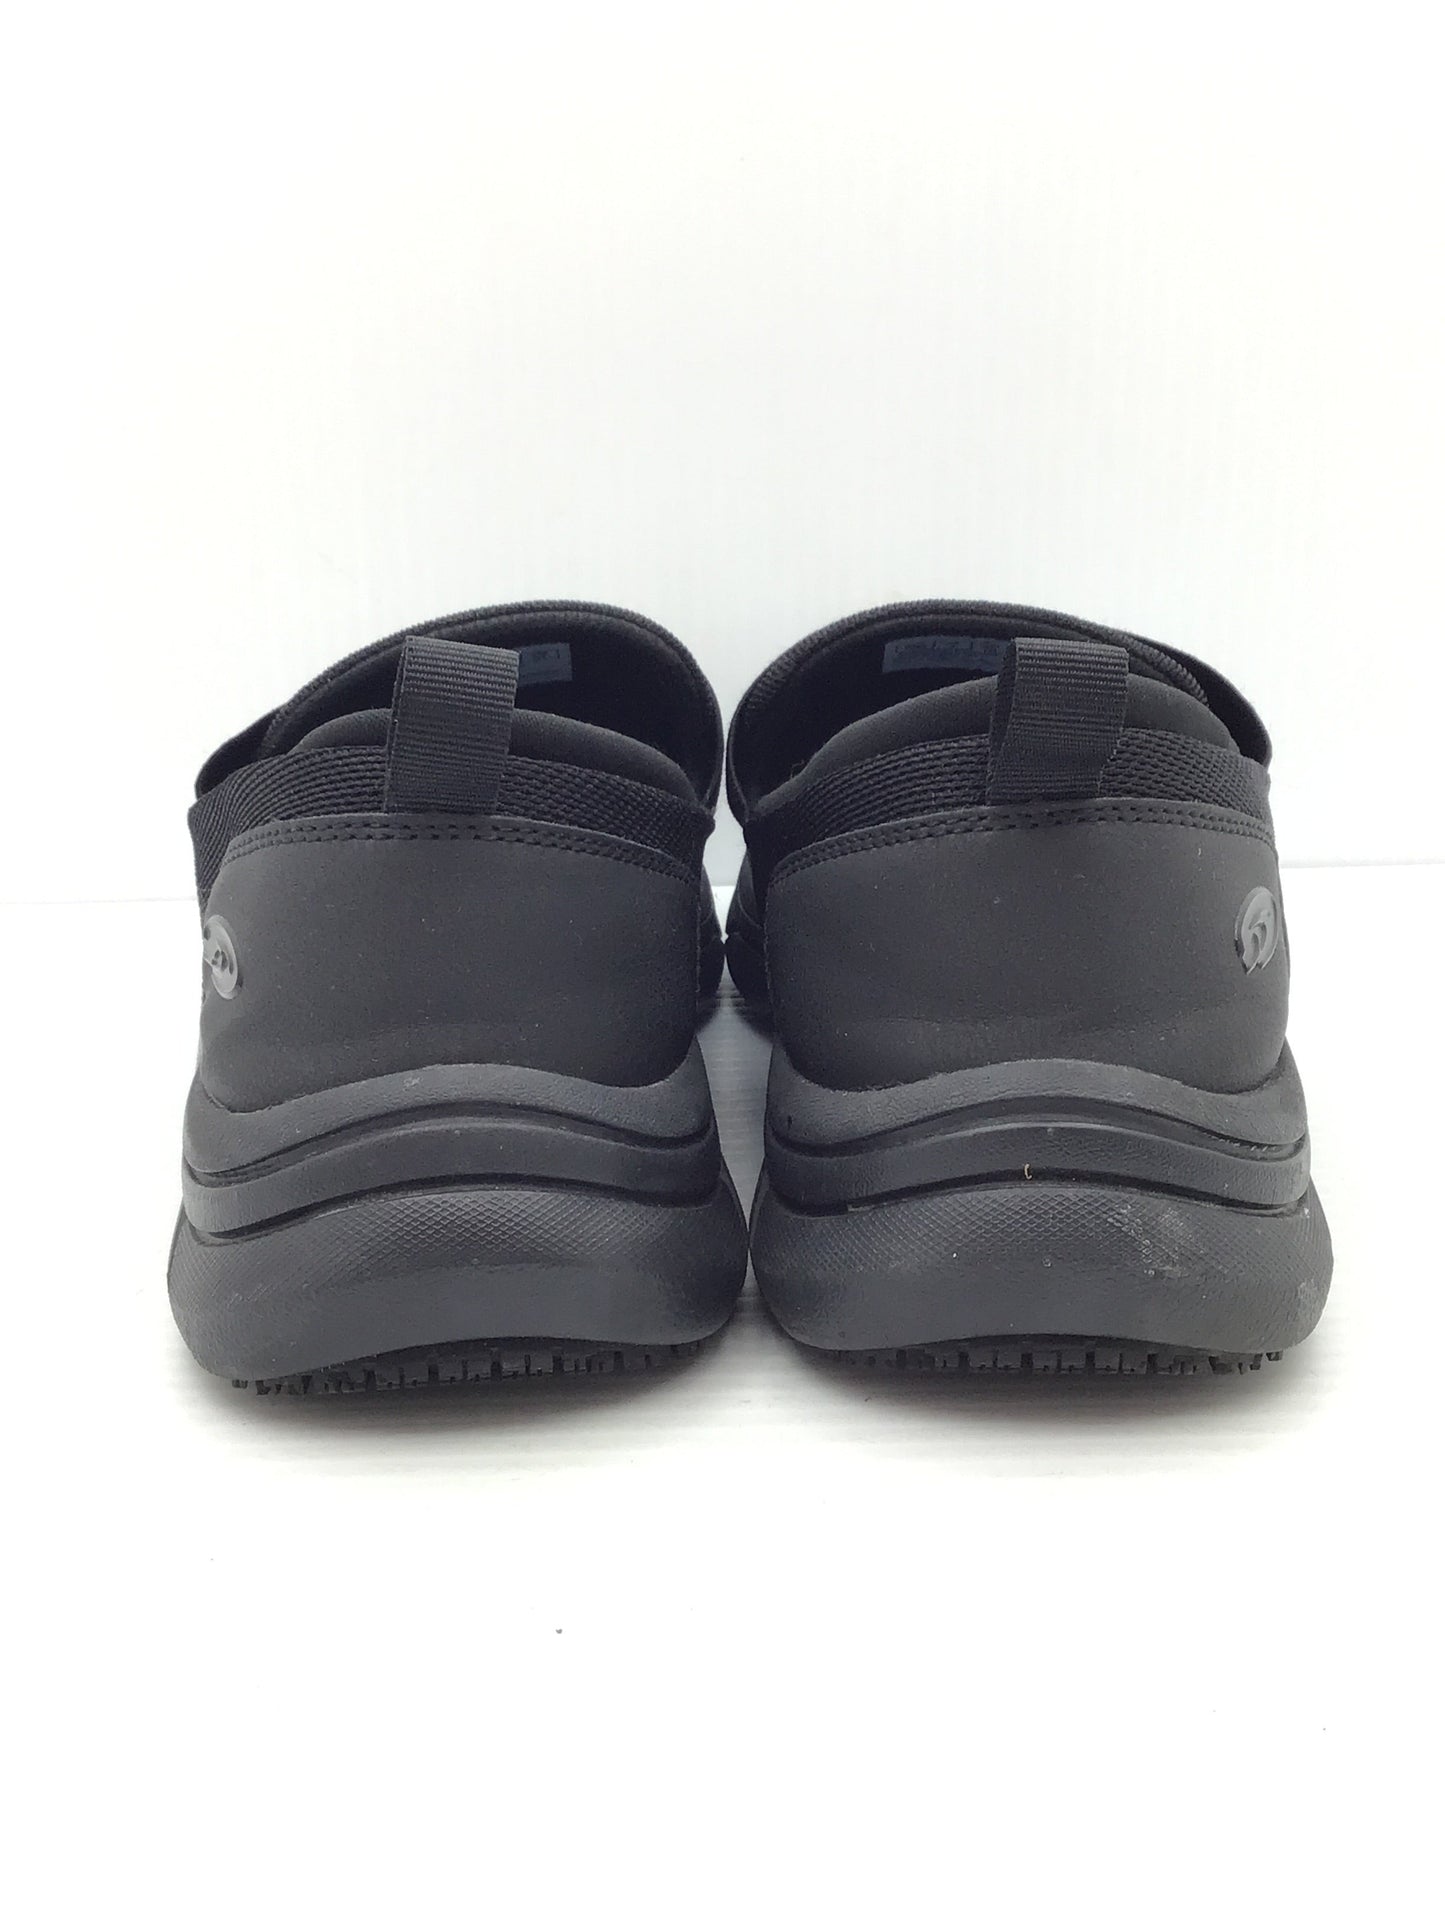 Shoes Sneakers By Dr Scholls  Size: 10